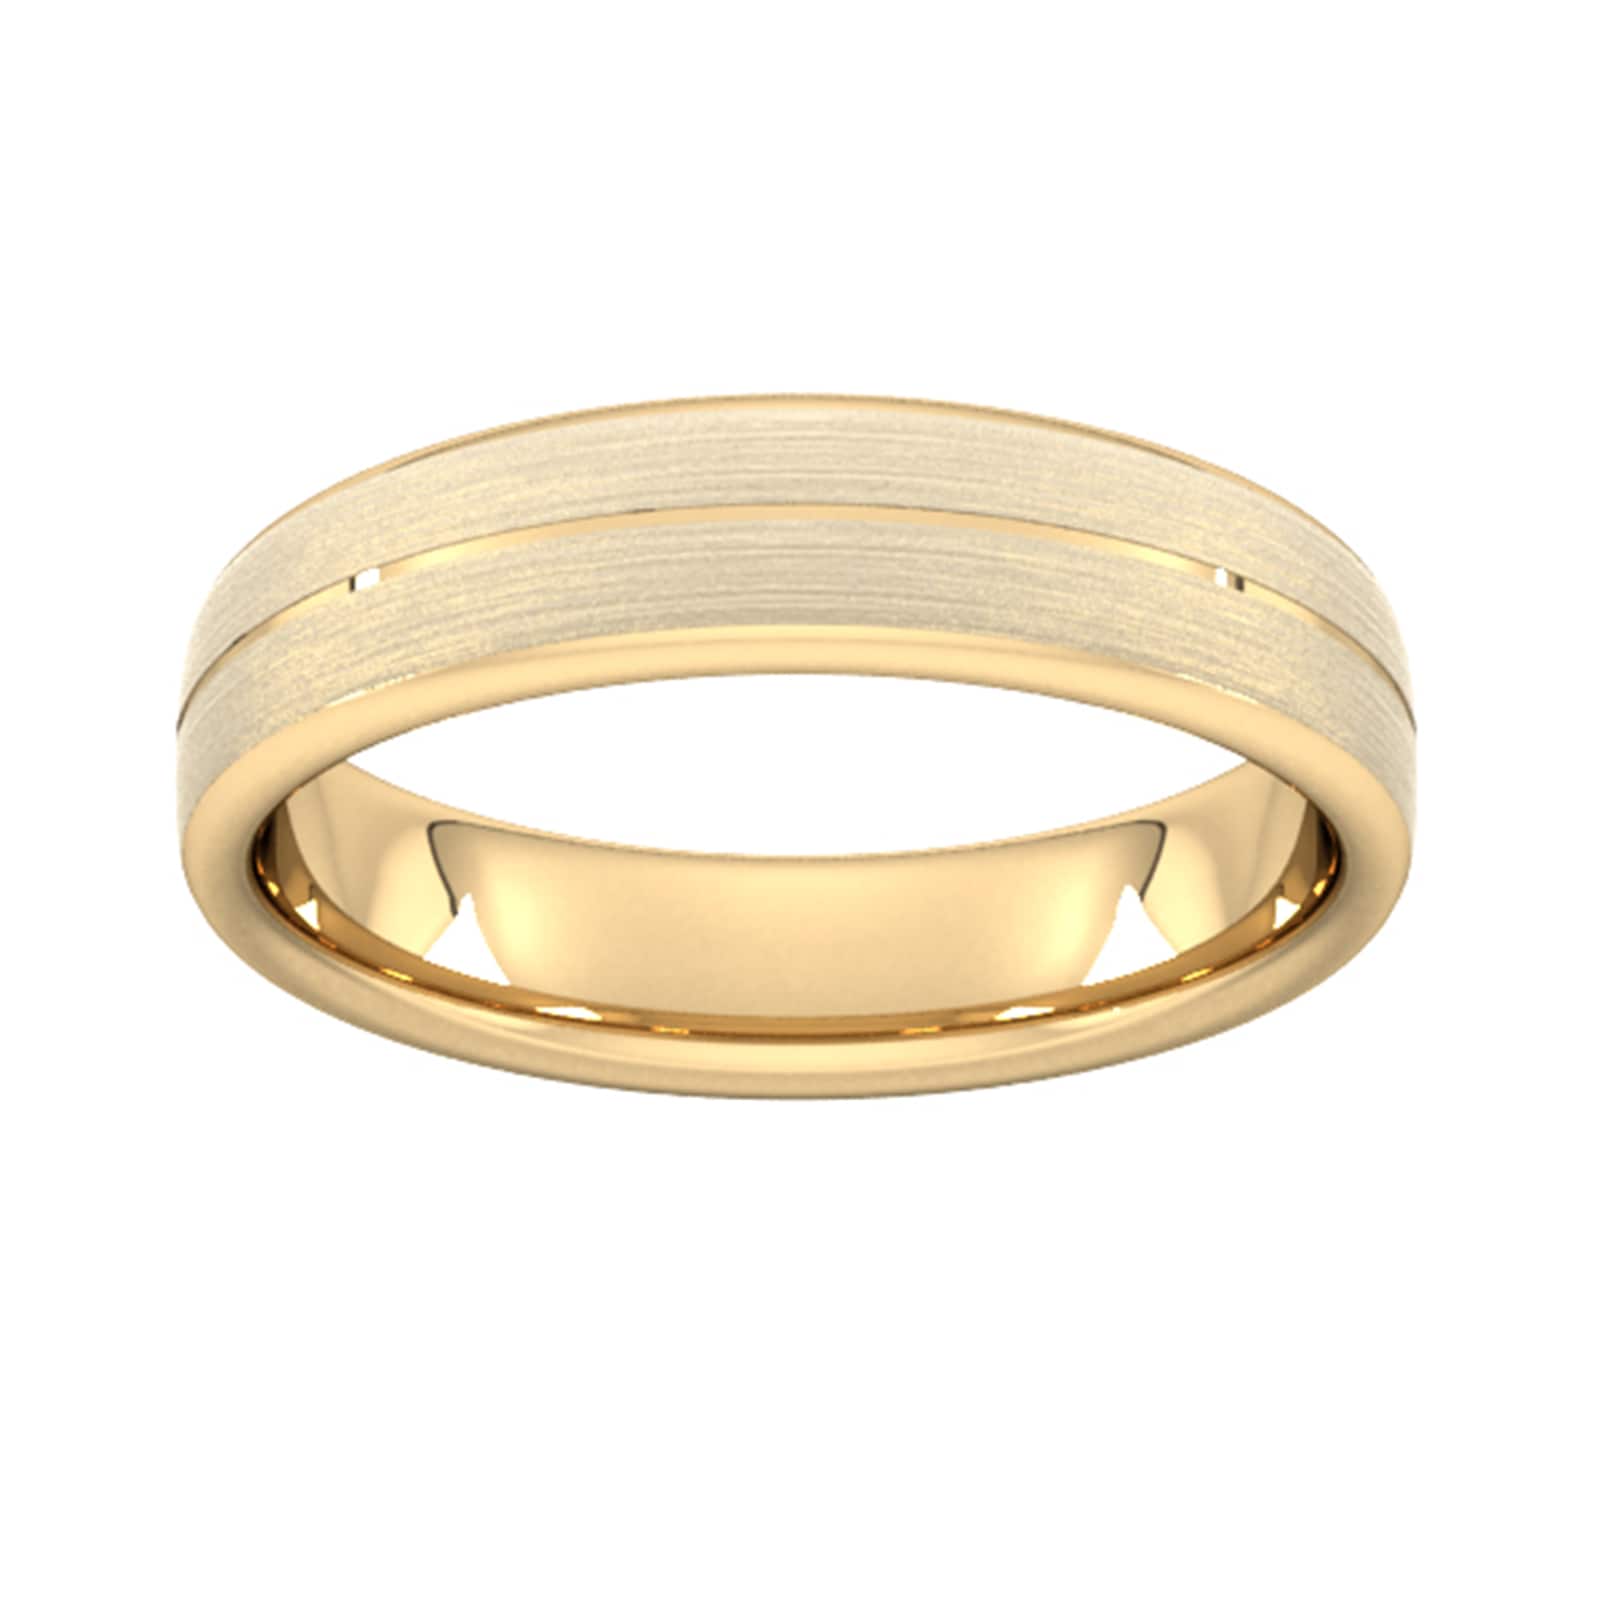 5mm Slight Court Heavy Centre Groove With Chamfered Edge Wedding Ring In 9 Carat Yellow Gold - Ring Size M